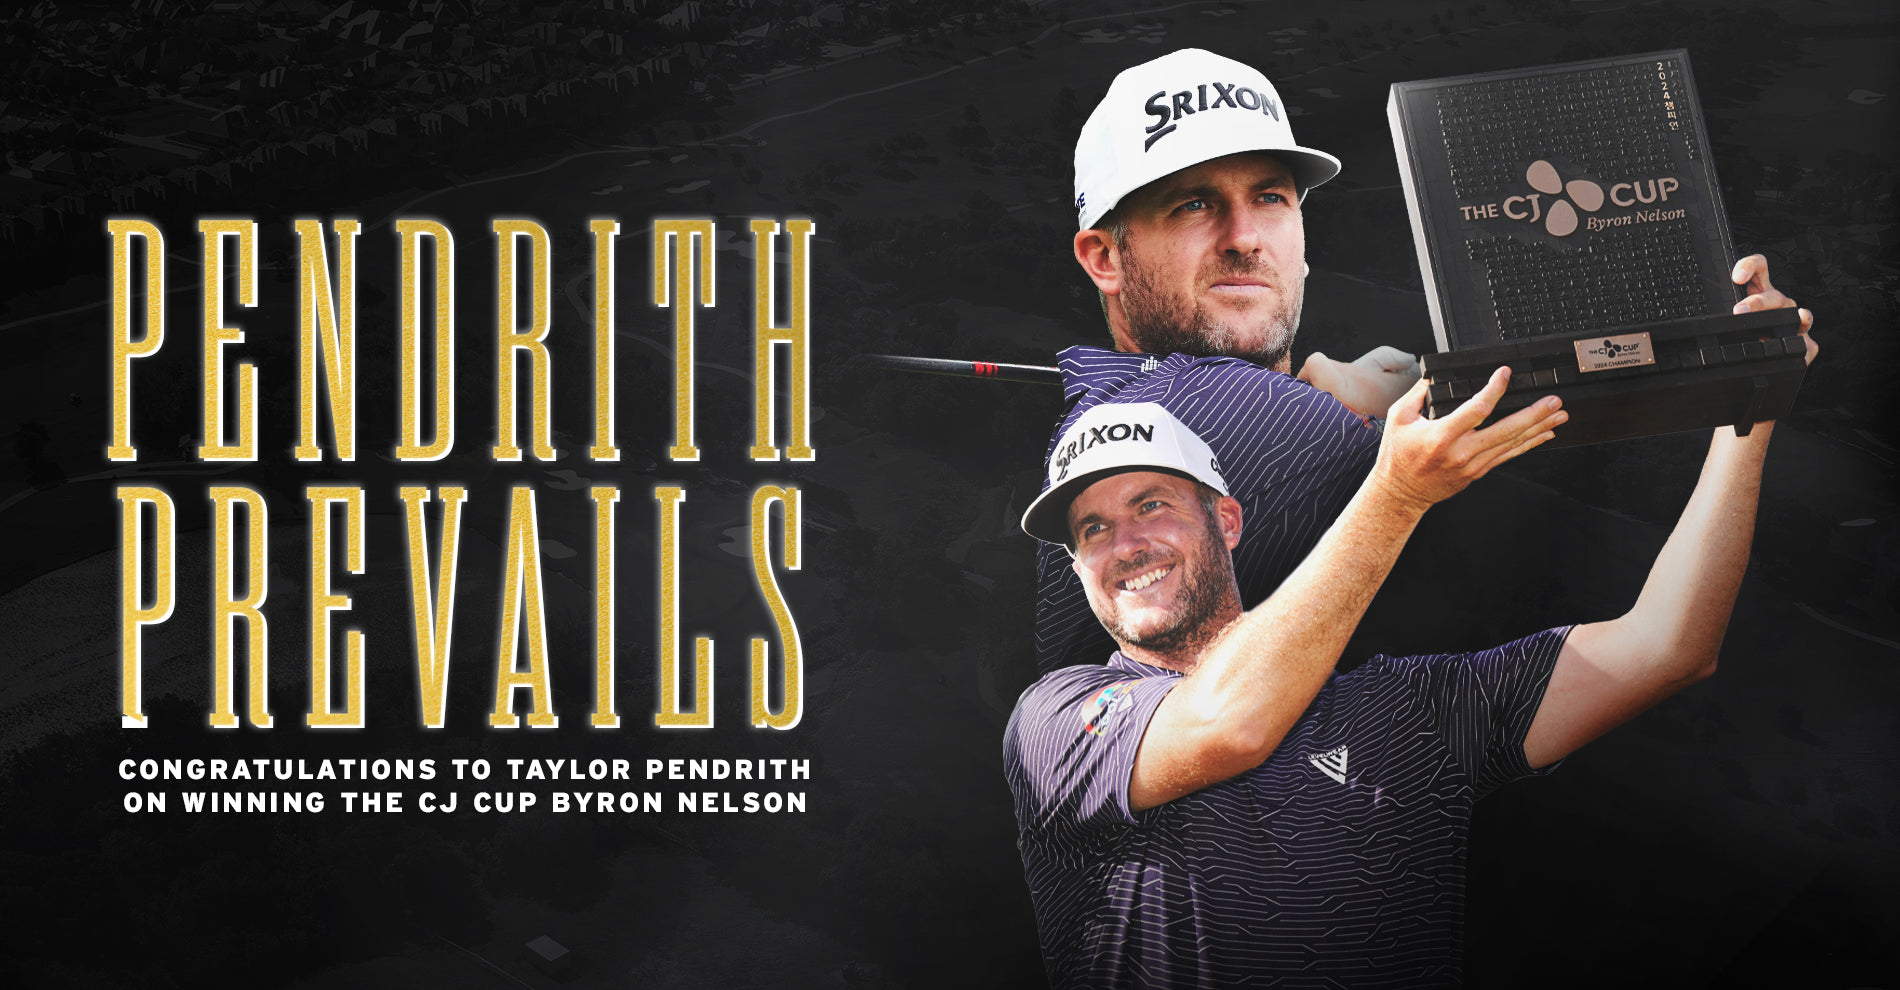 Taylor prevails. Congratulations to Taylor on winning the CJ Cup Bryon Nelson